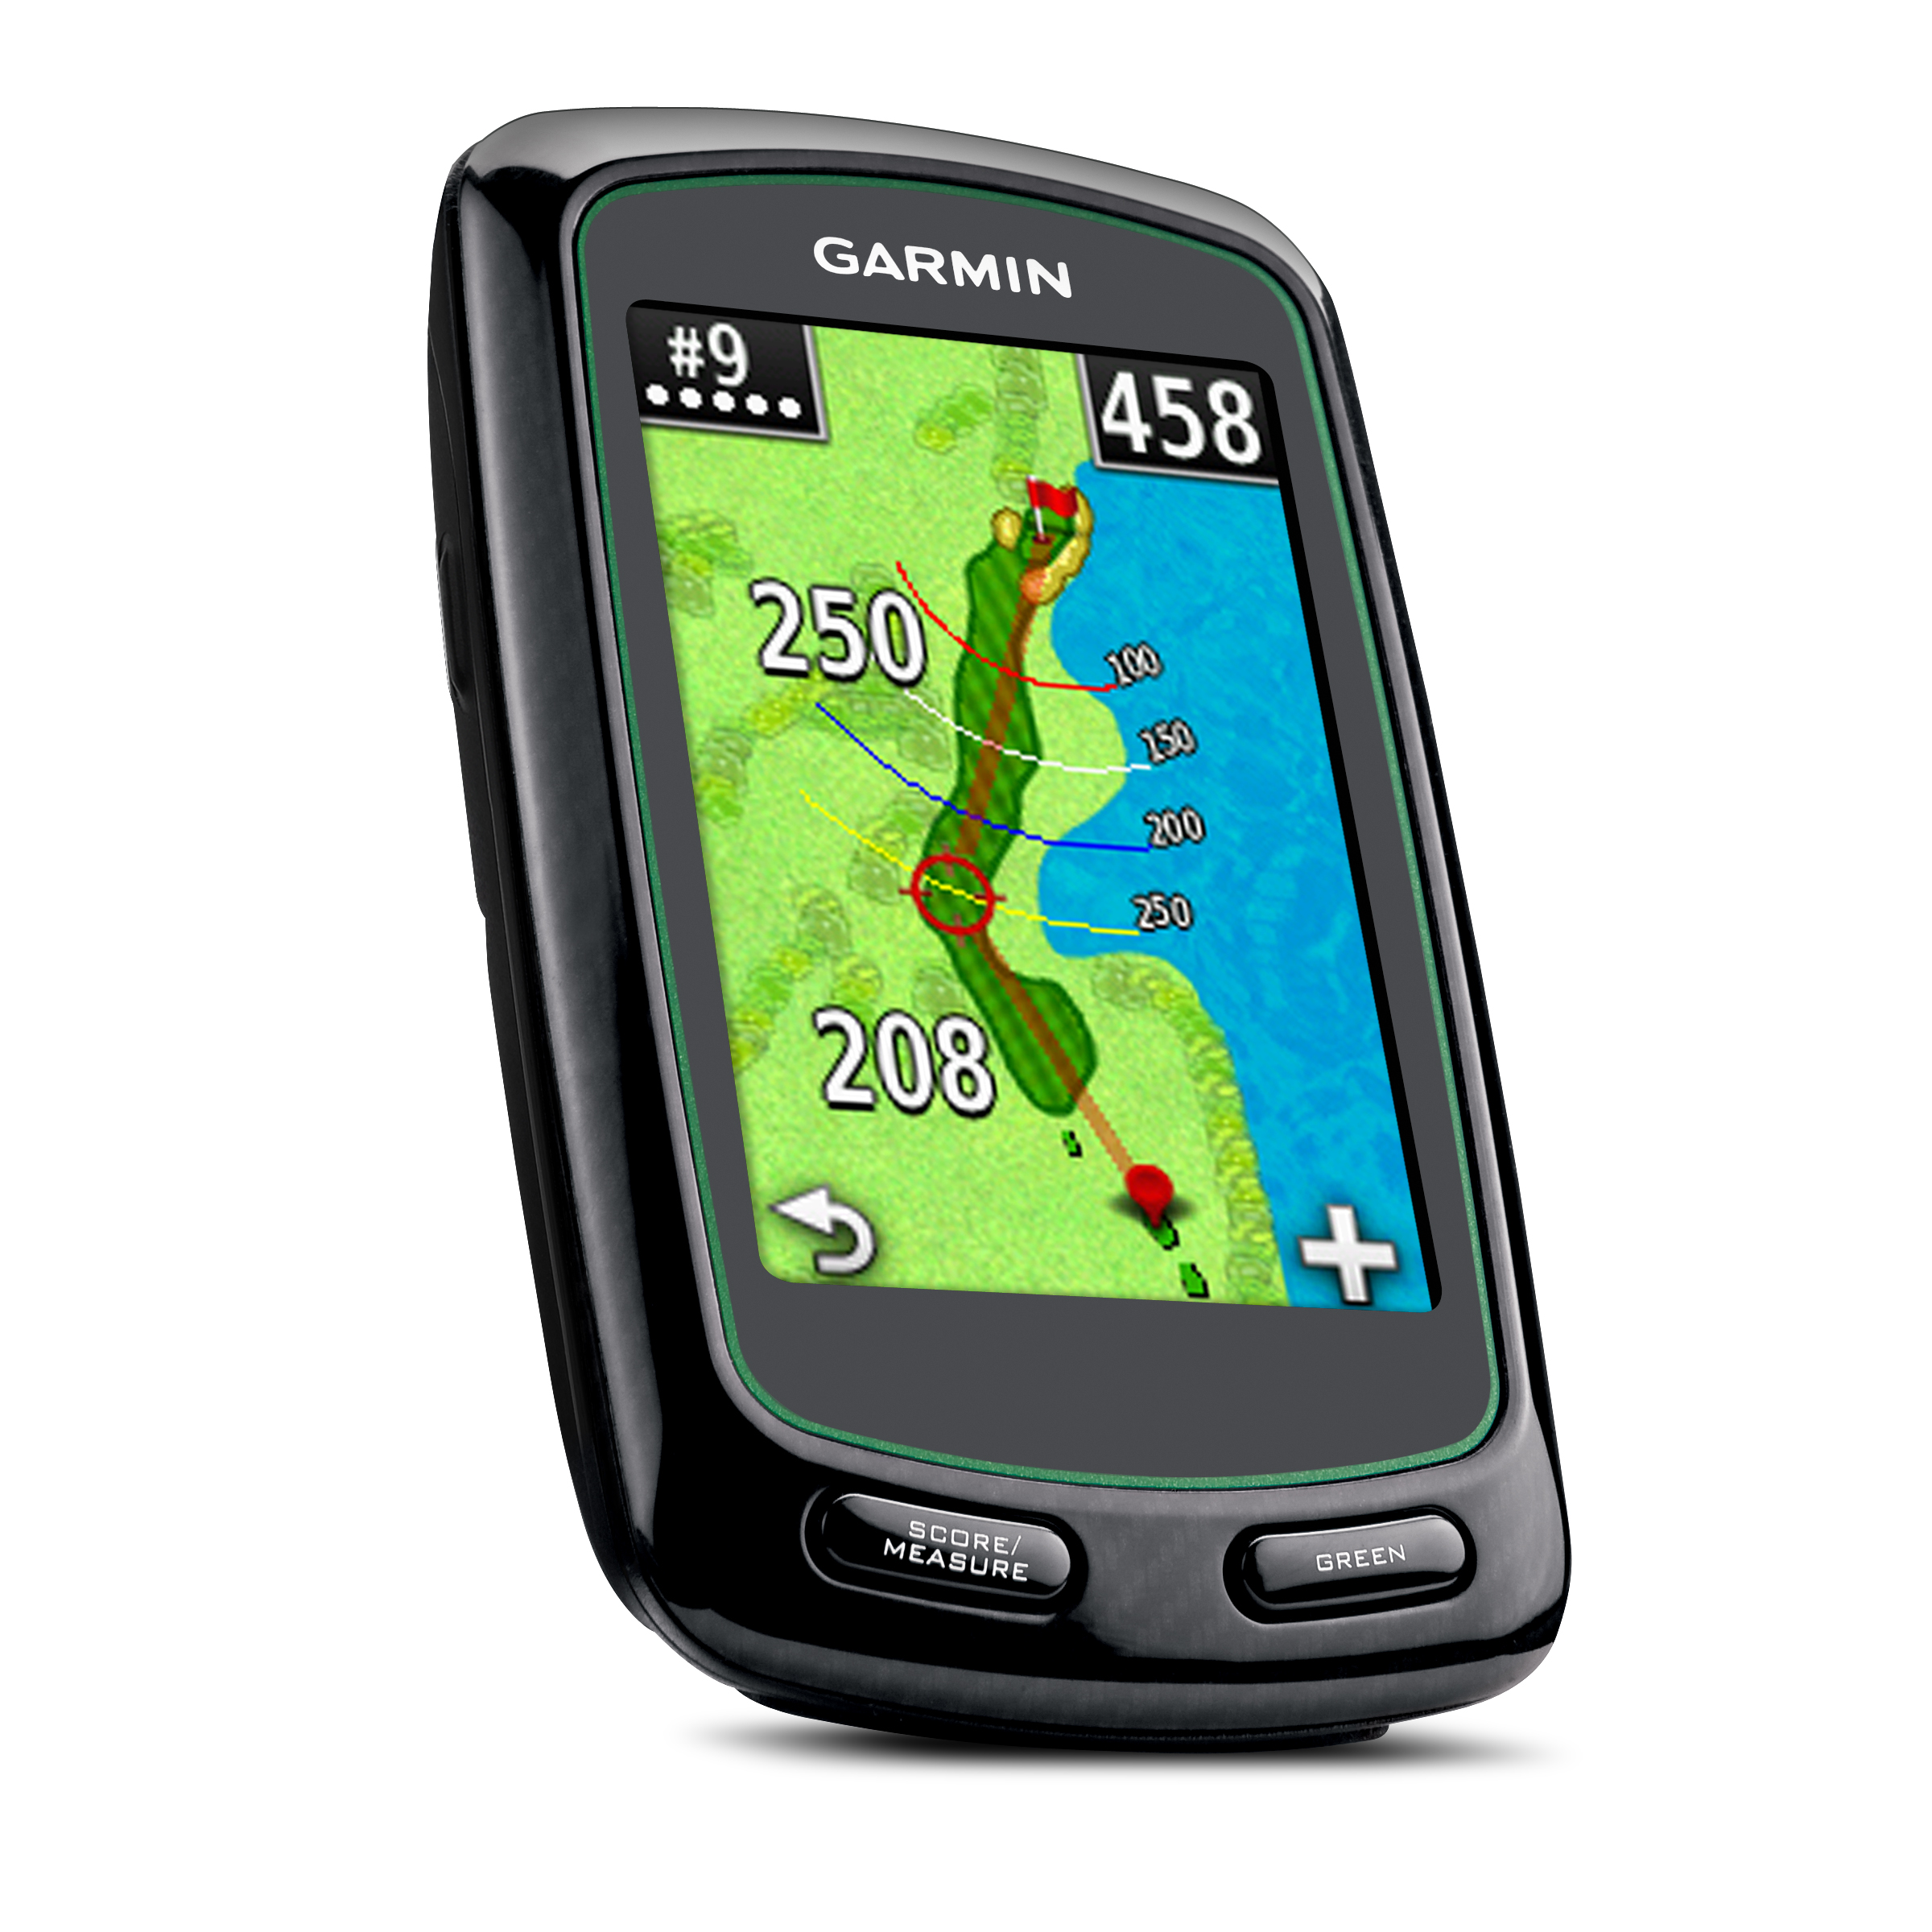 Garmin® Approach™ GPS takes golf to a whole new level with worldwide preloaded courses, no subscriptions and rechargeable battery - Garmin